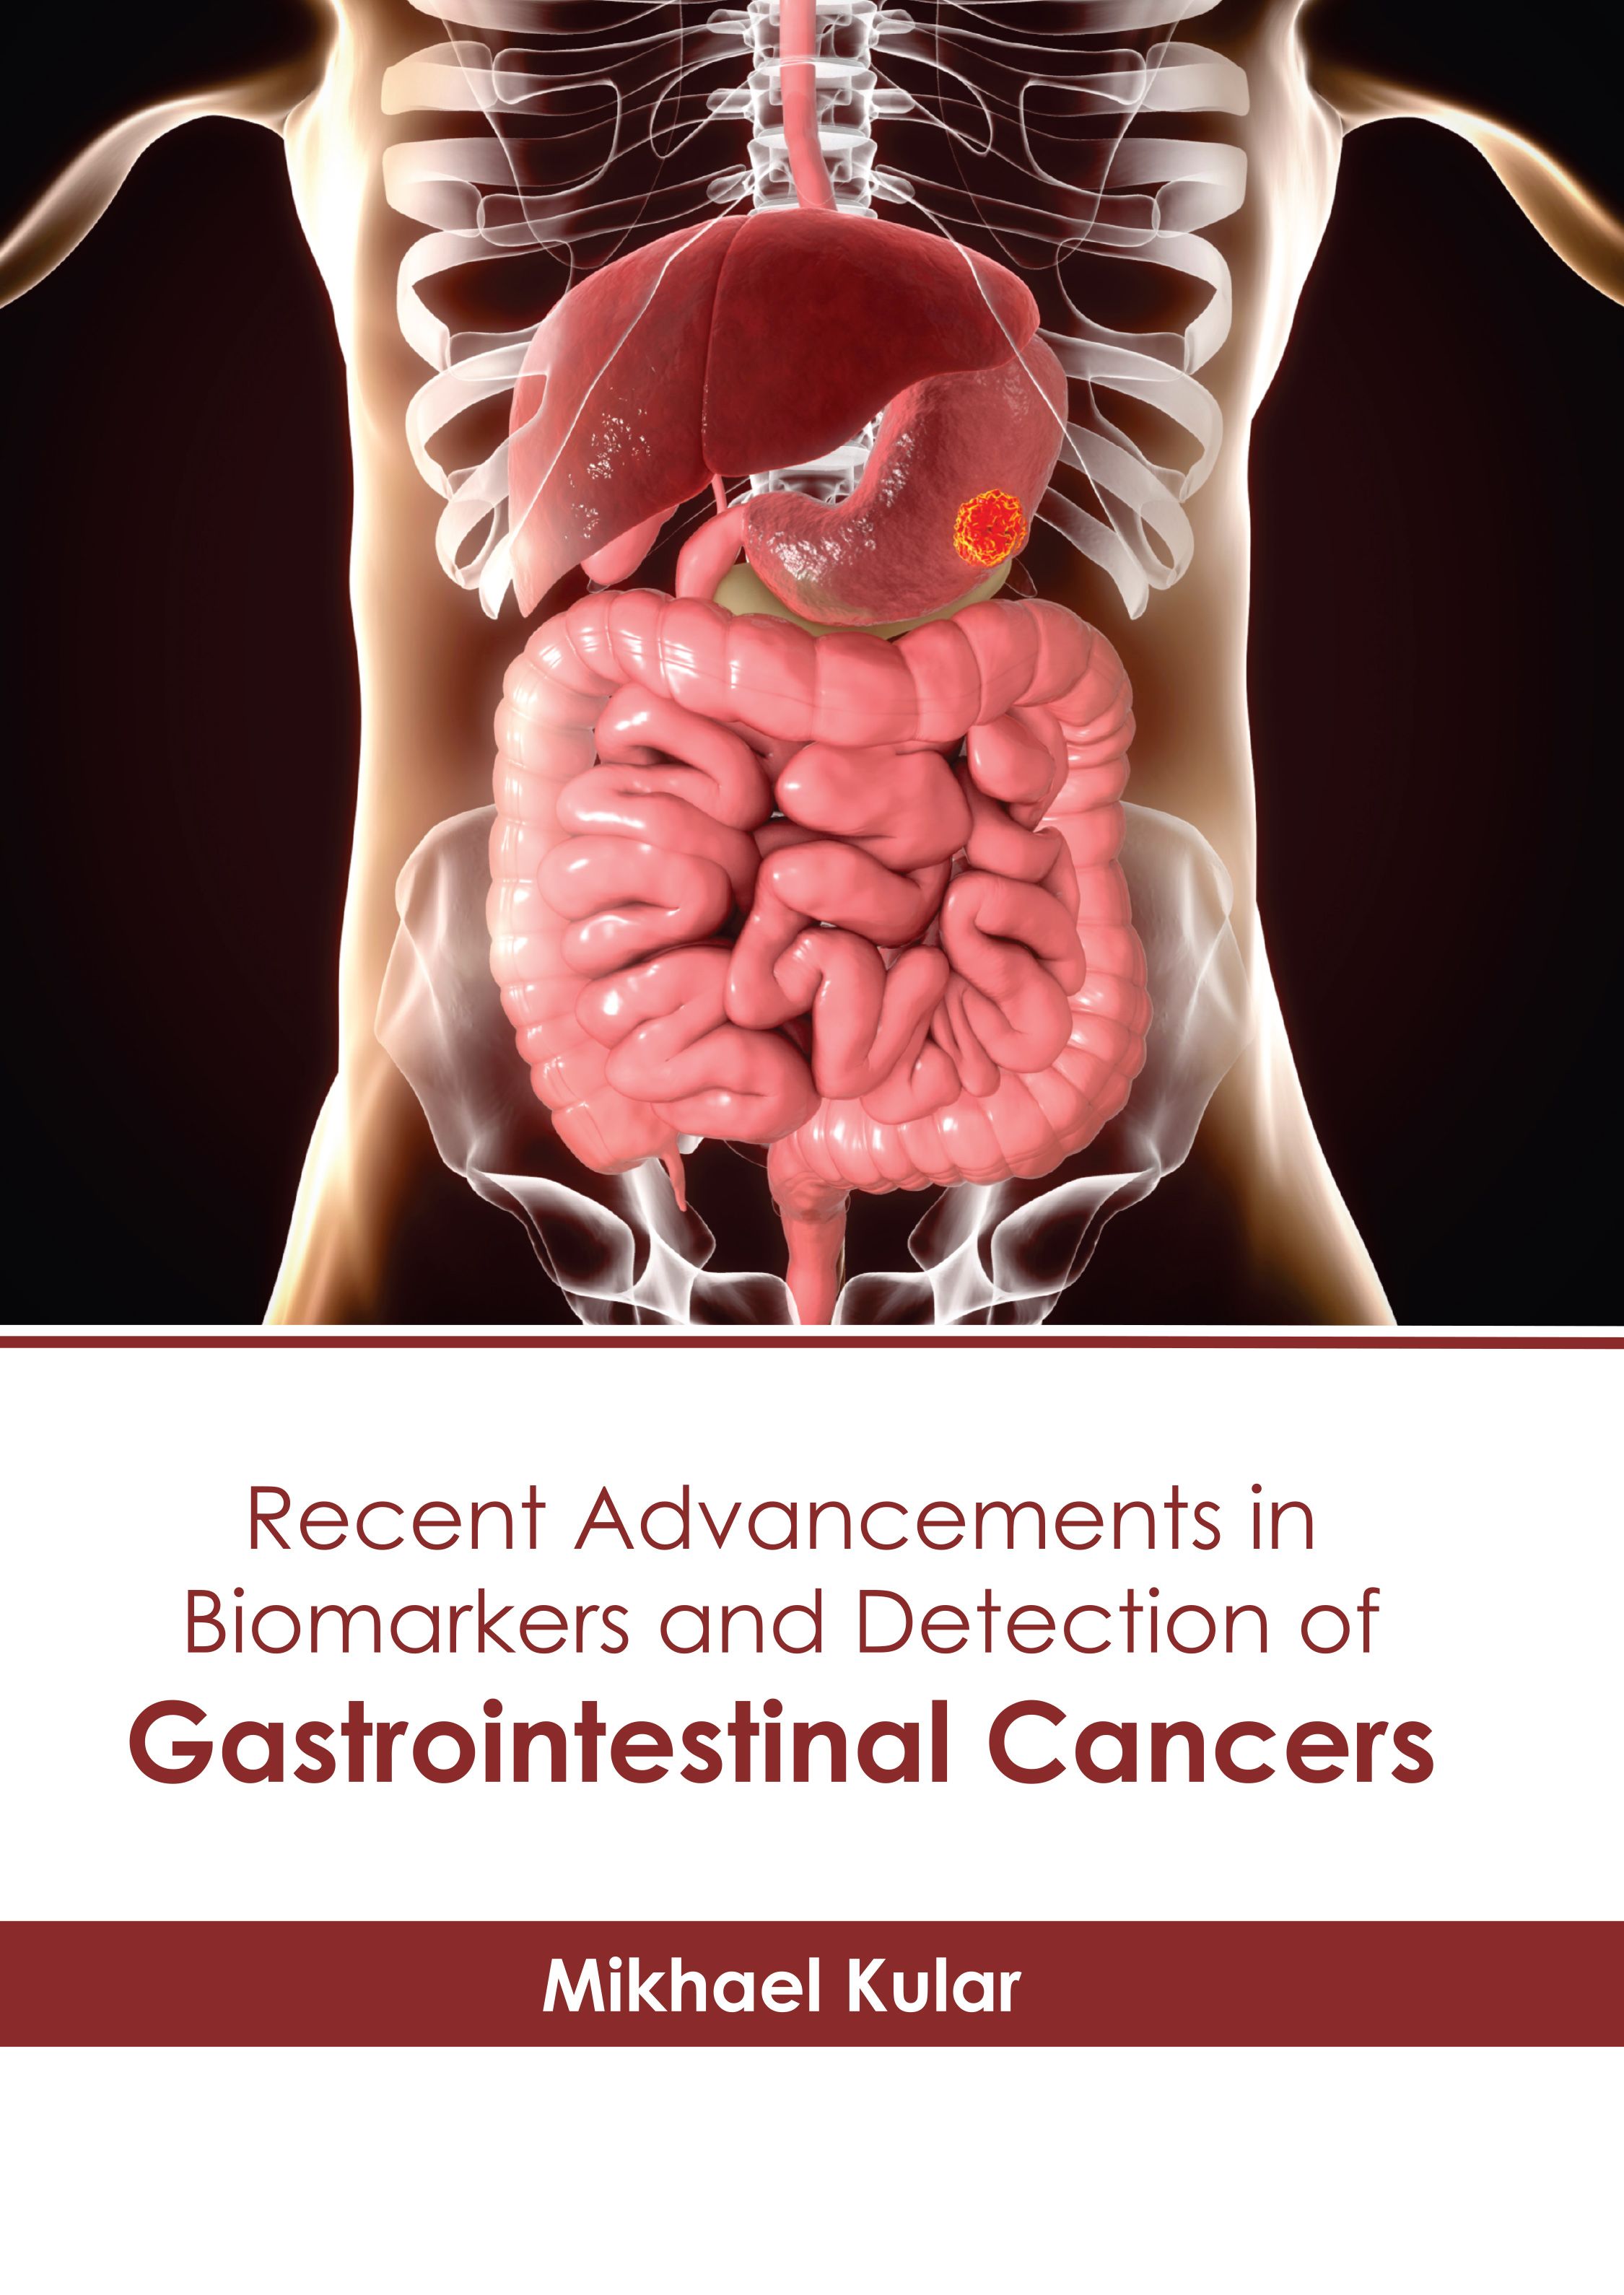 

exclusive-publishers/american-medical-publishers/recent-advancements-in-biomarkers-and-detection-of-gastrointestinal-cancers-9798887404196